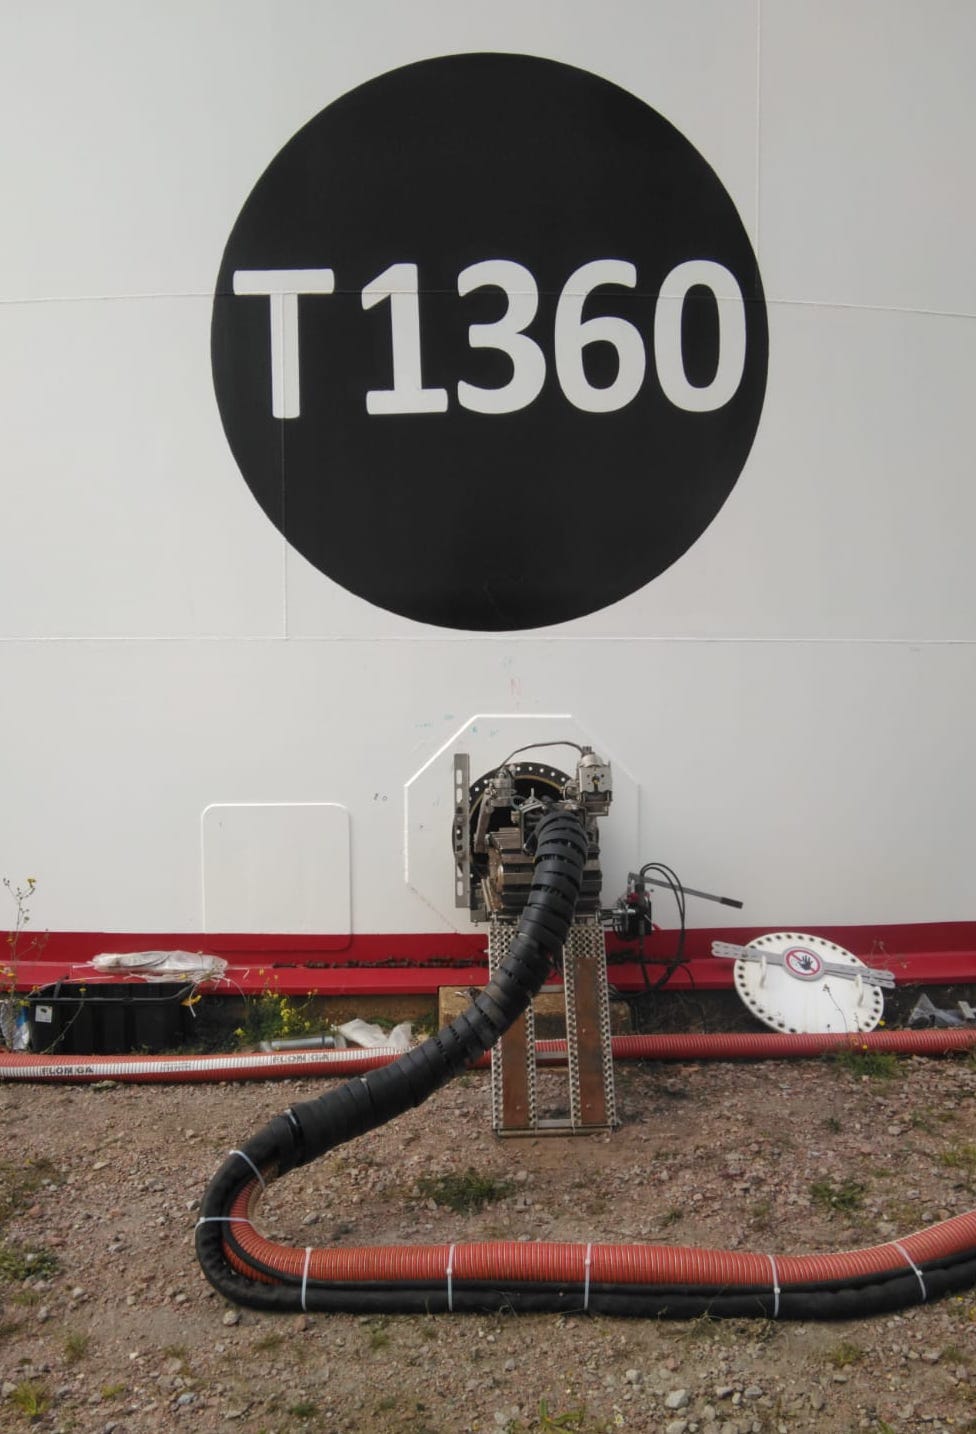 Re-Gen Robotics completes their first crude oil tank clean for Phillips 66 Humber Refinery